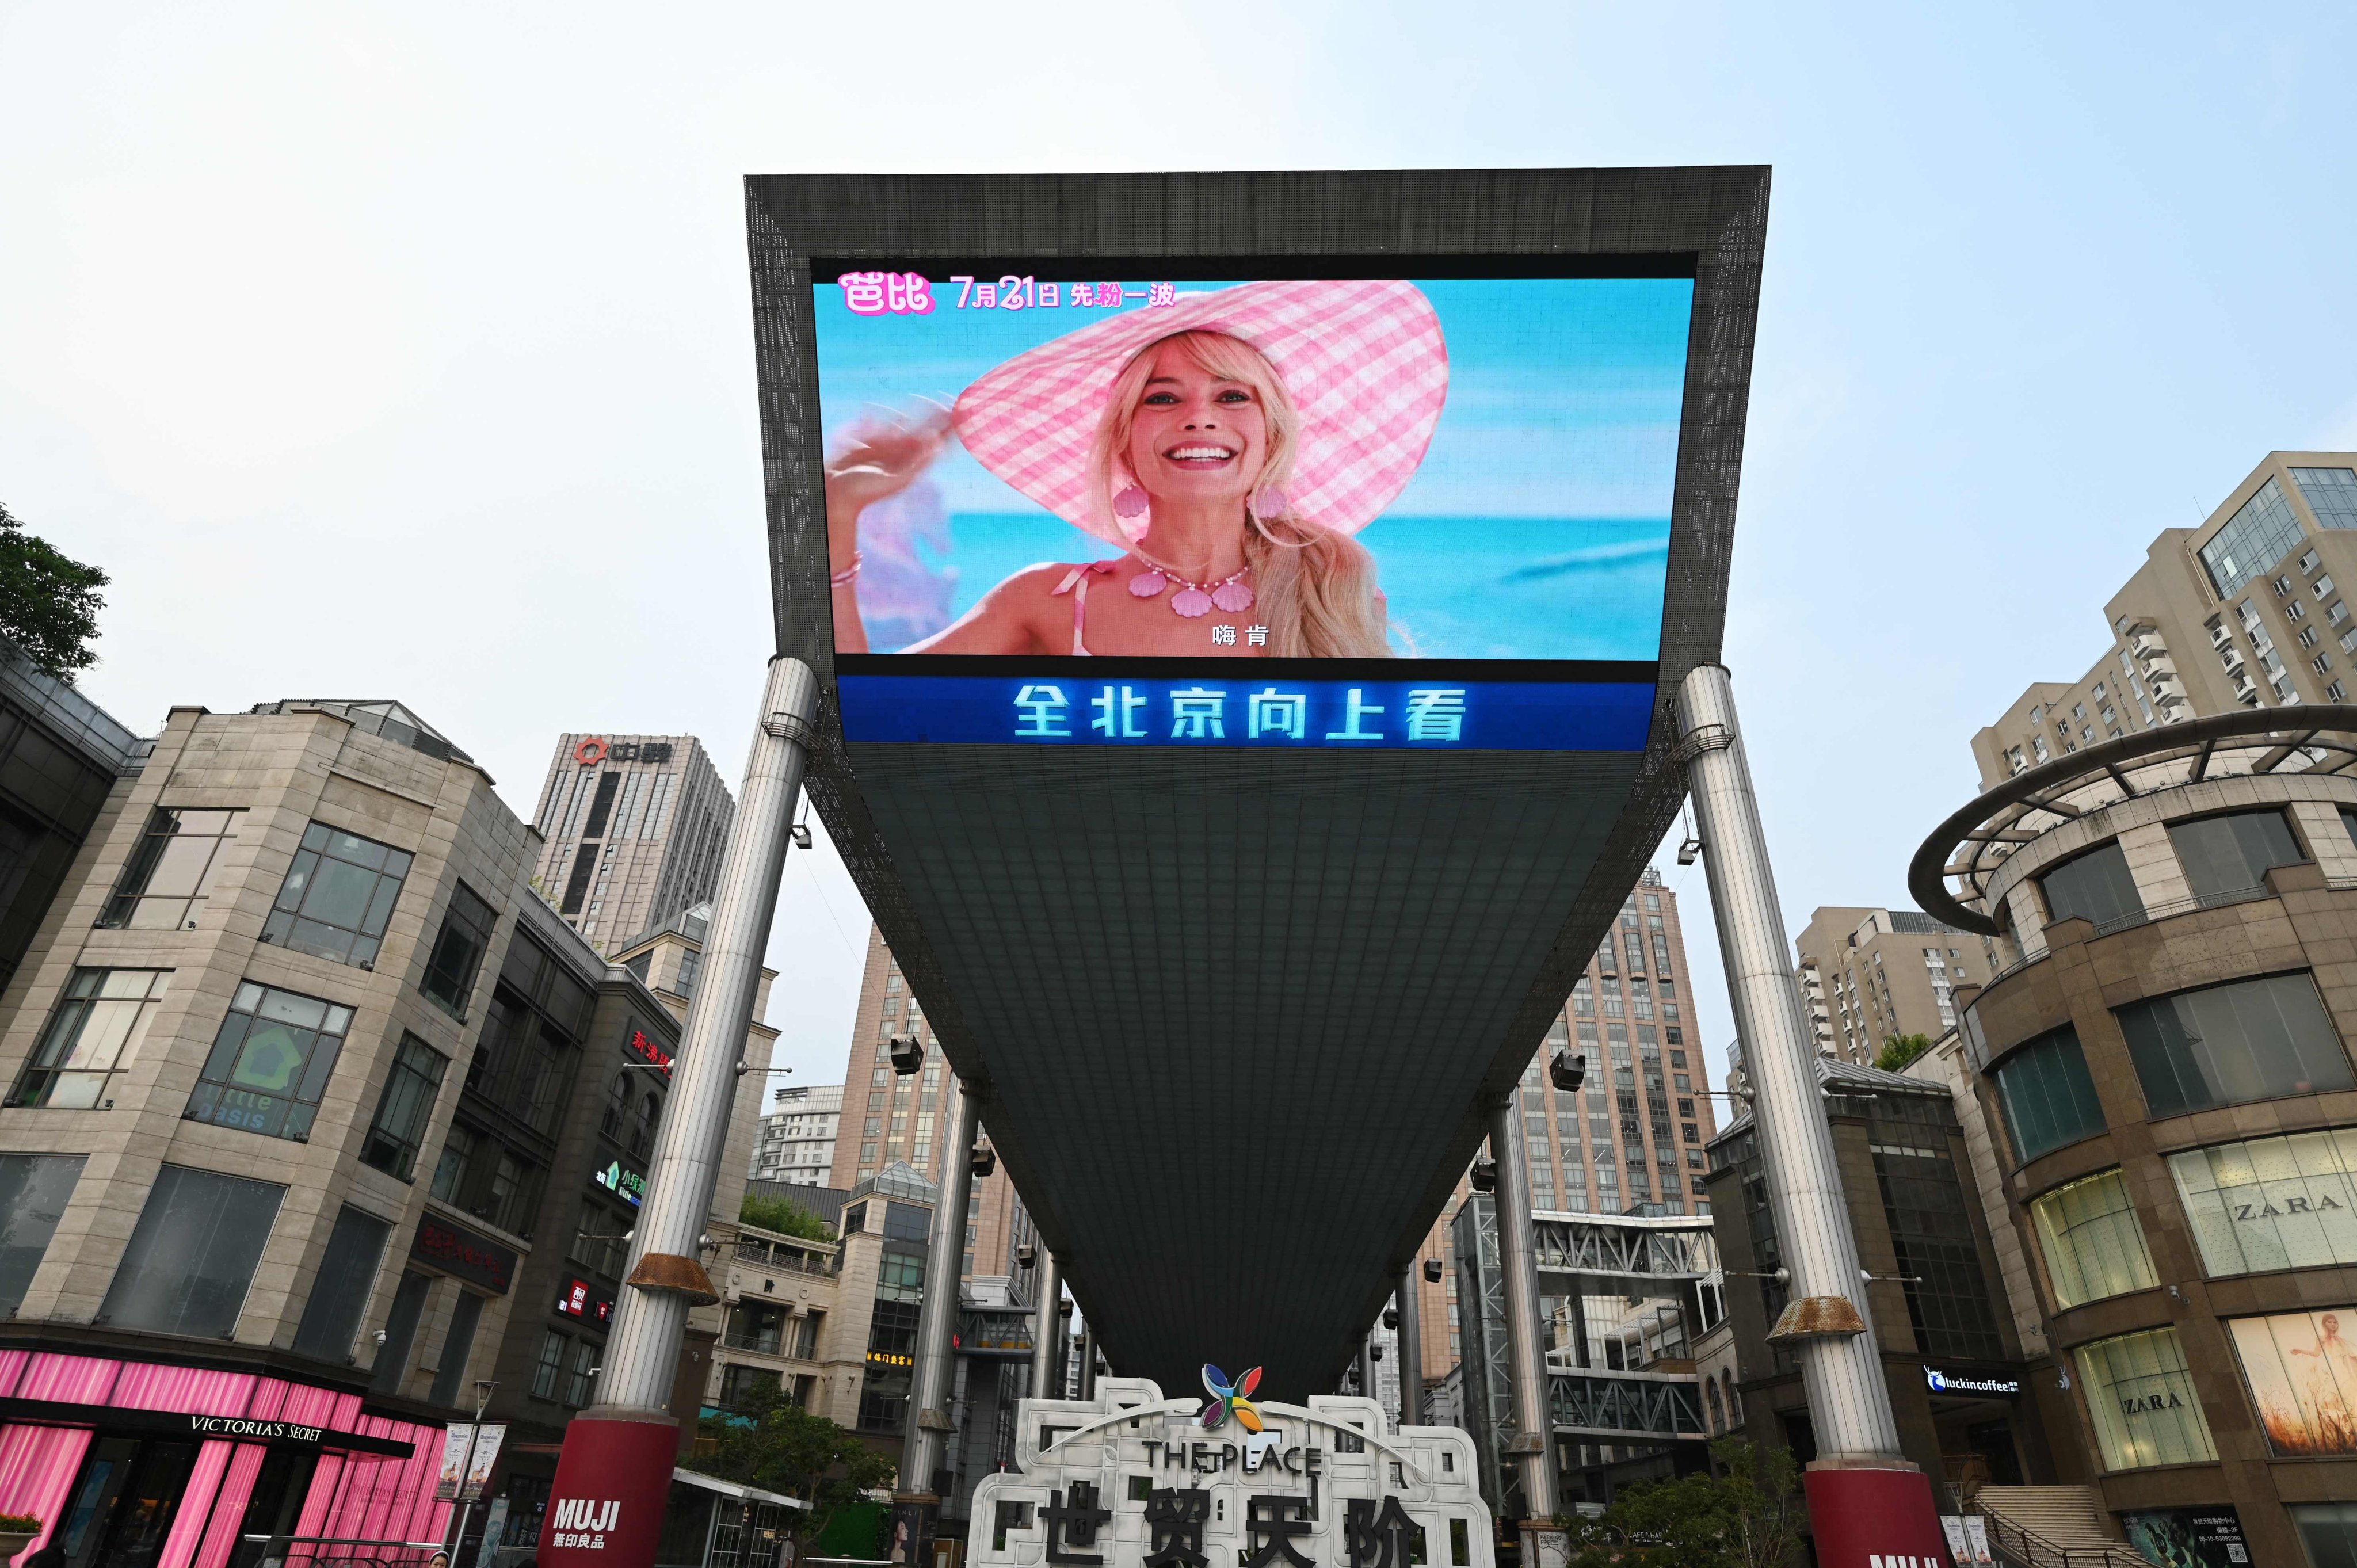 A trailer for the movie “Barbie” is shown on a giant screen outside a shopping mall in Beijing on July 20. Photo: AFP